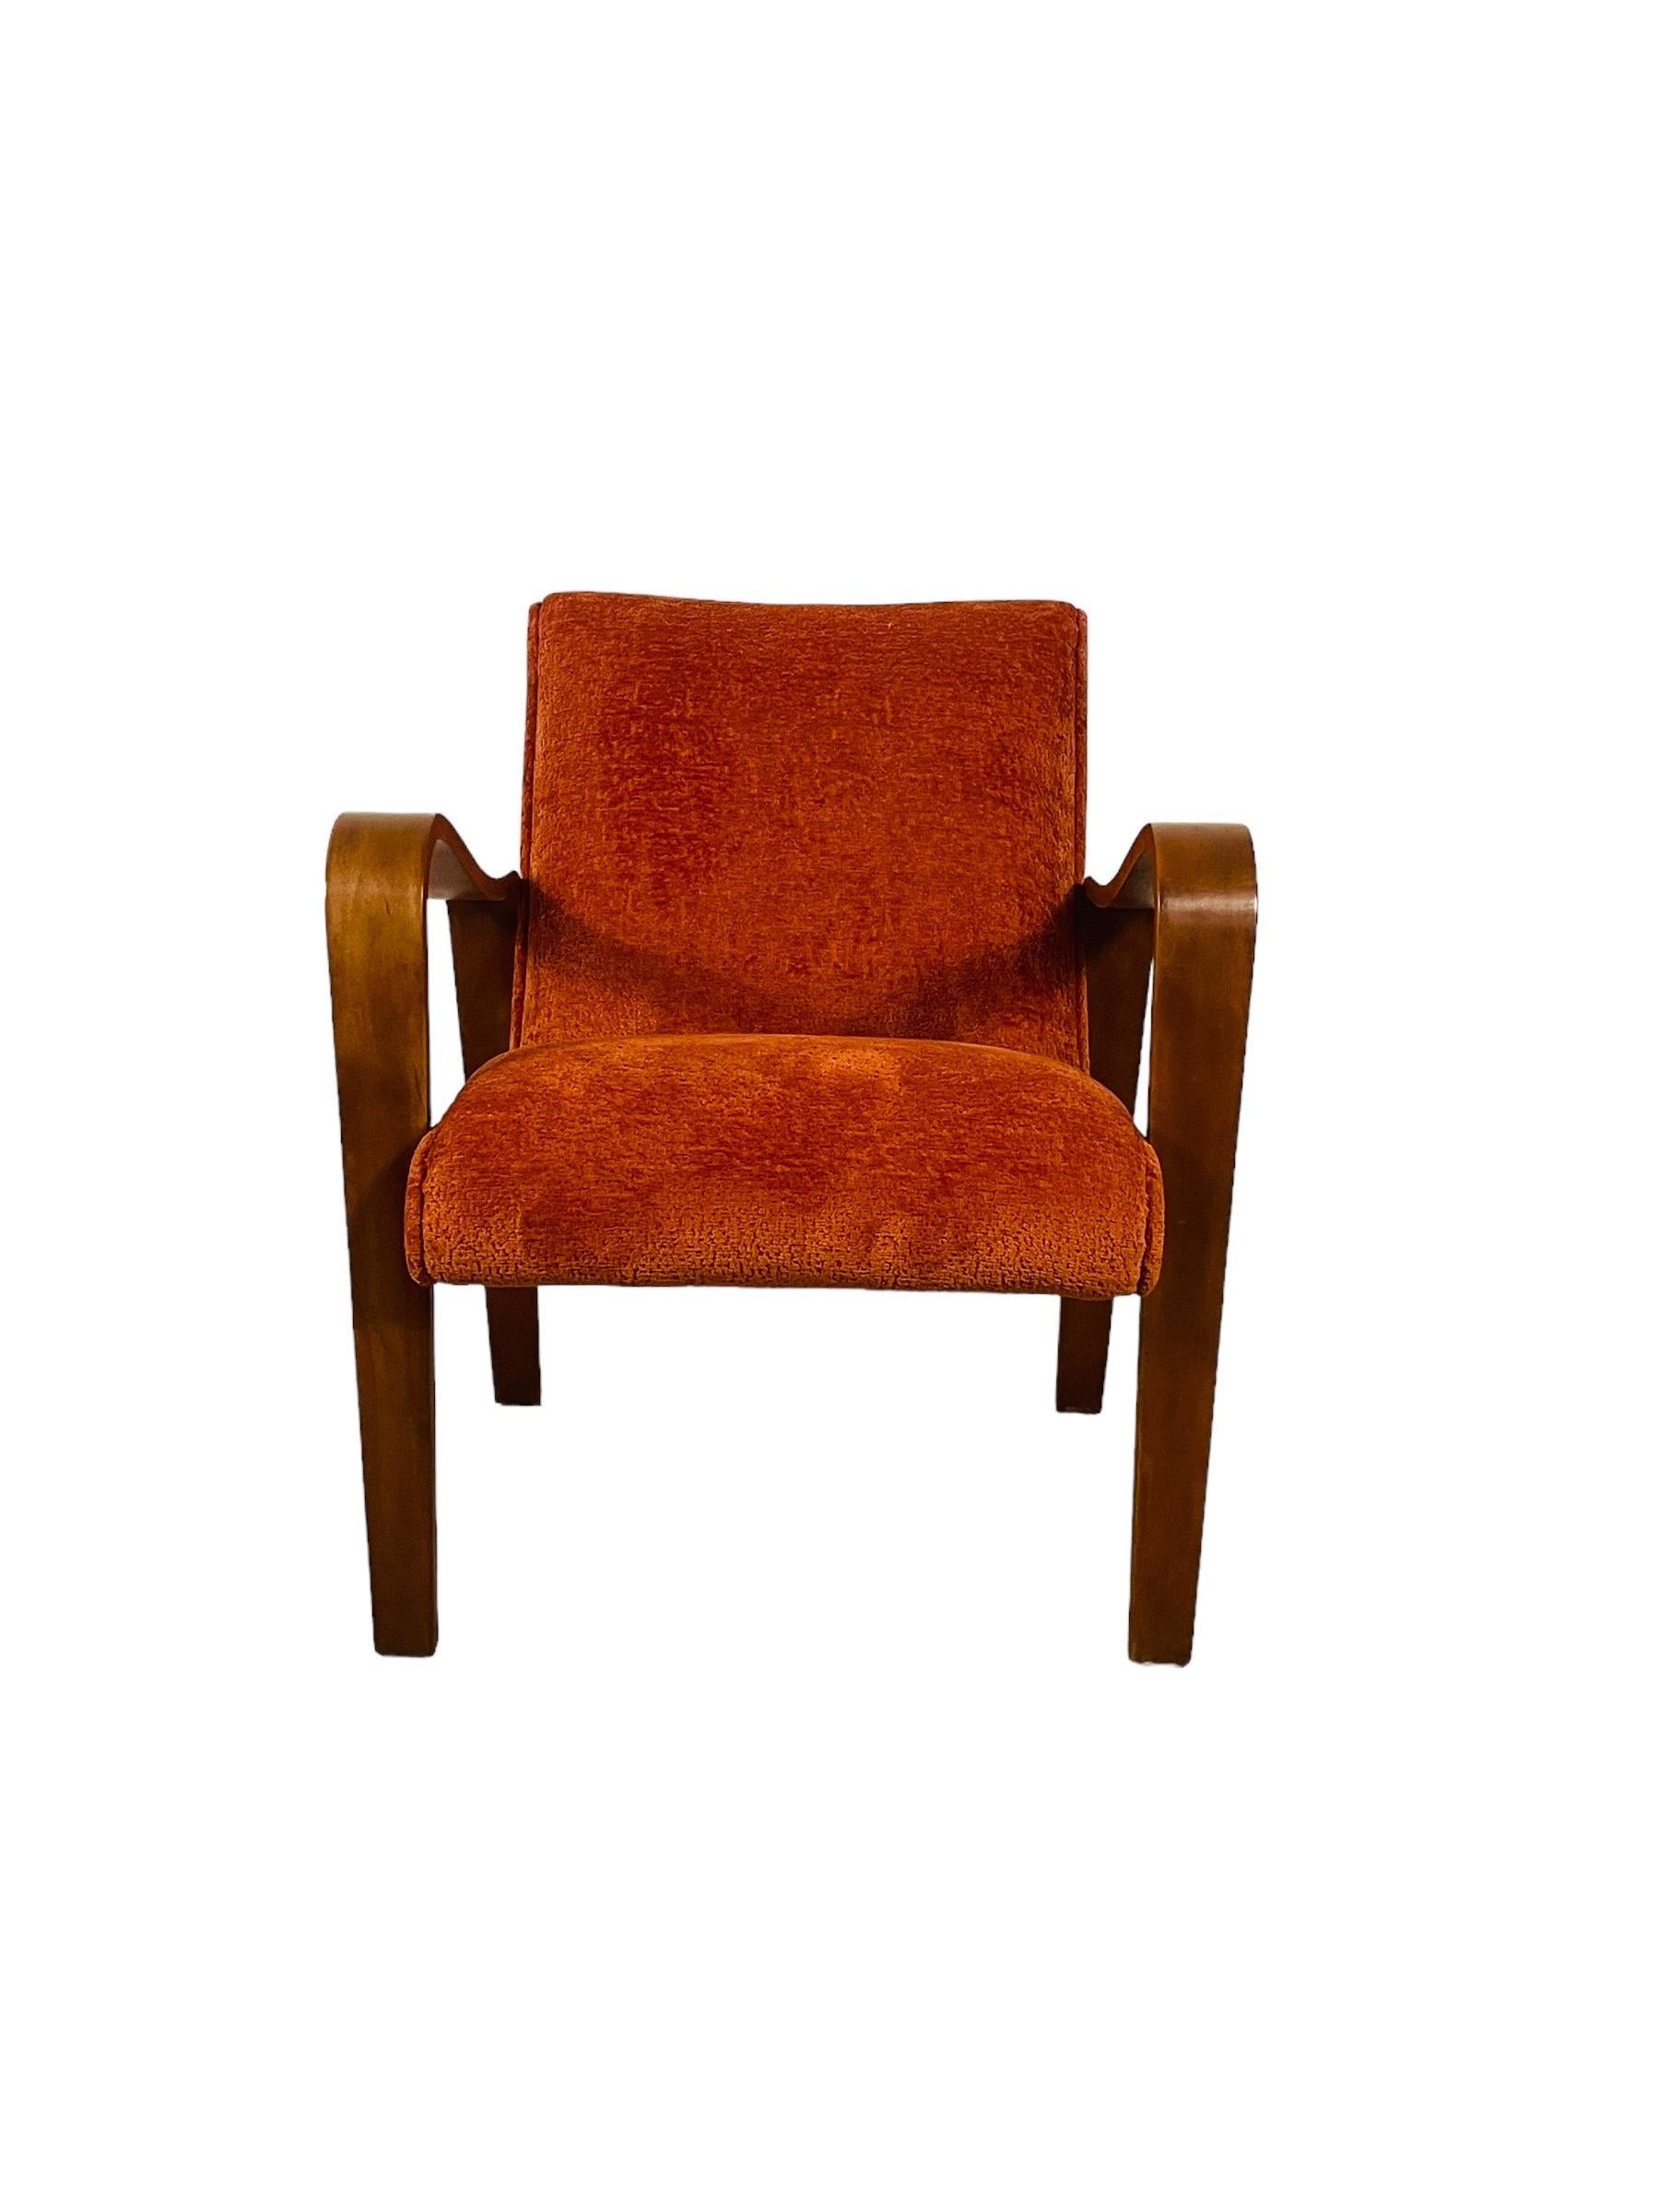 Mid Century Modern Thonet Lounge Chair Reupholstered 2